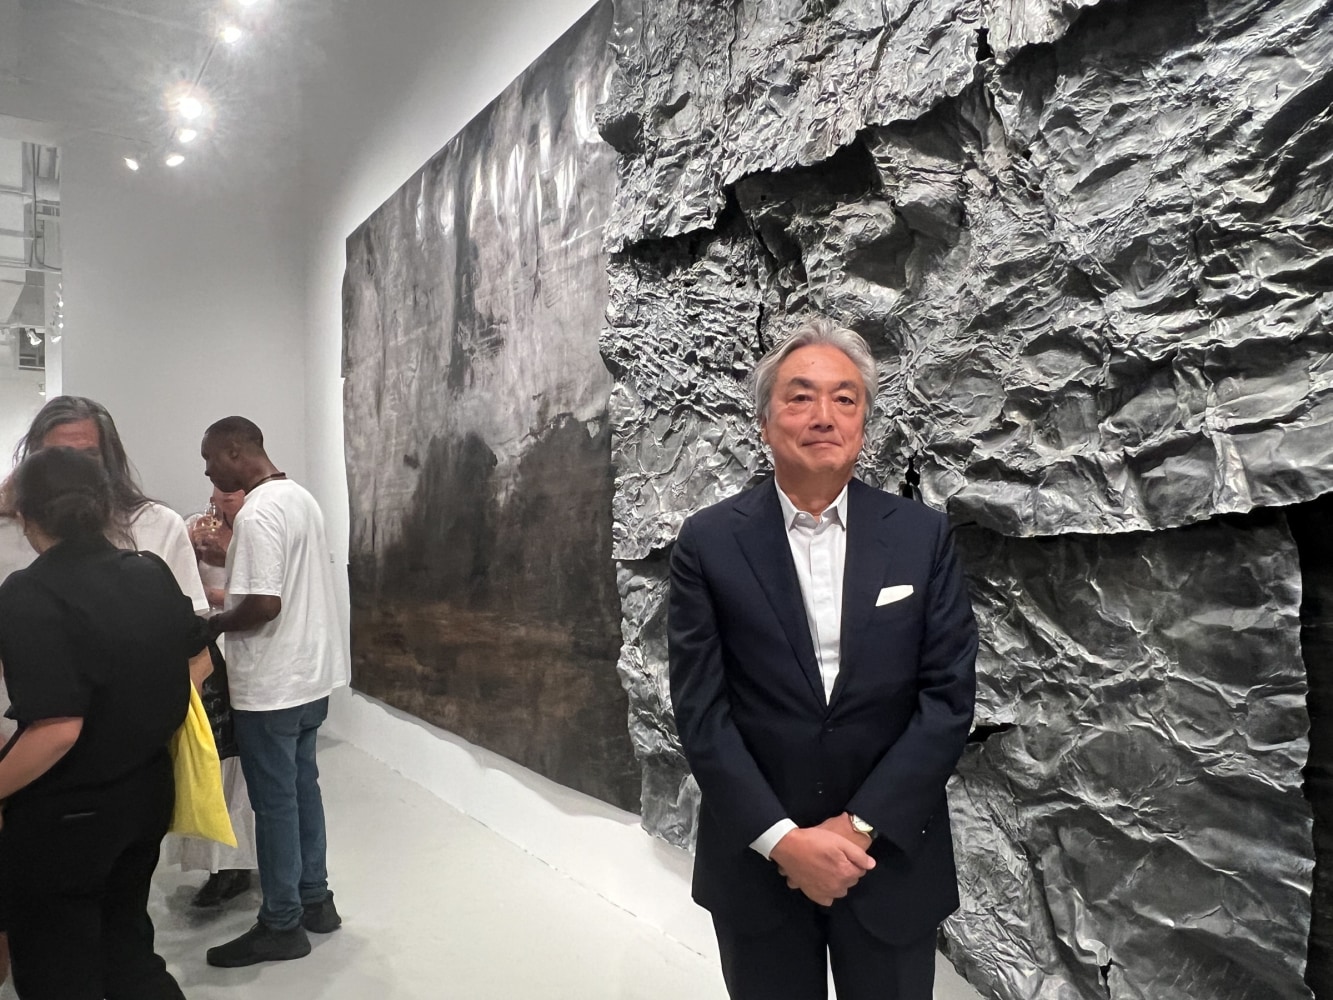 Participated in the group show in New York with artists from many diverse backgrounds. &amp;nbsp;I have discovered wonderful works that resonate with me.